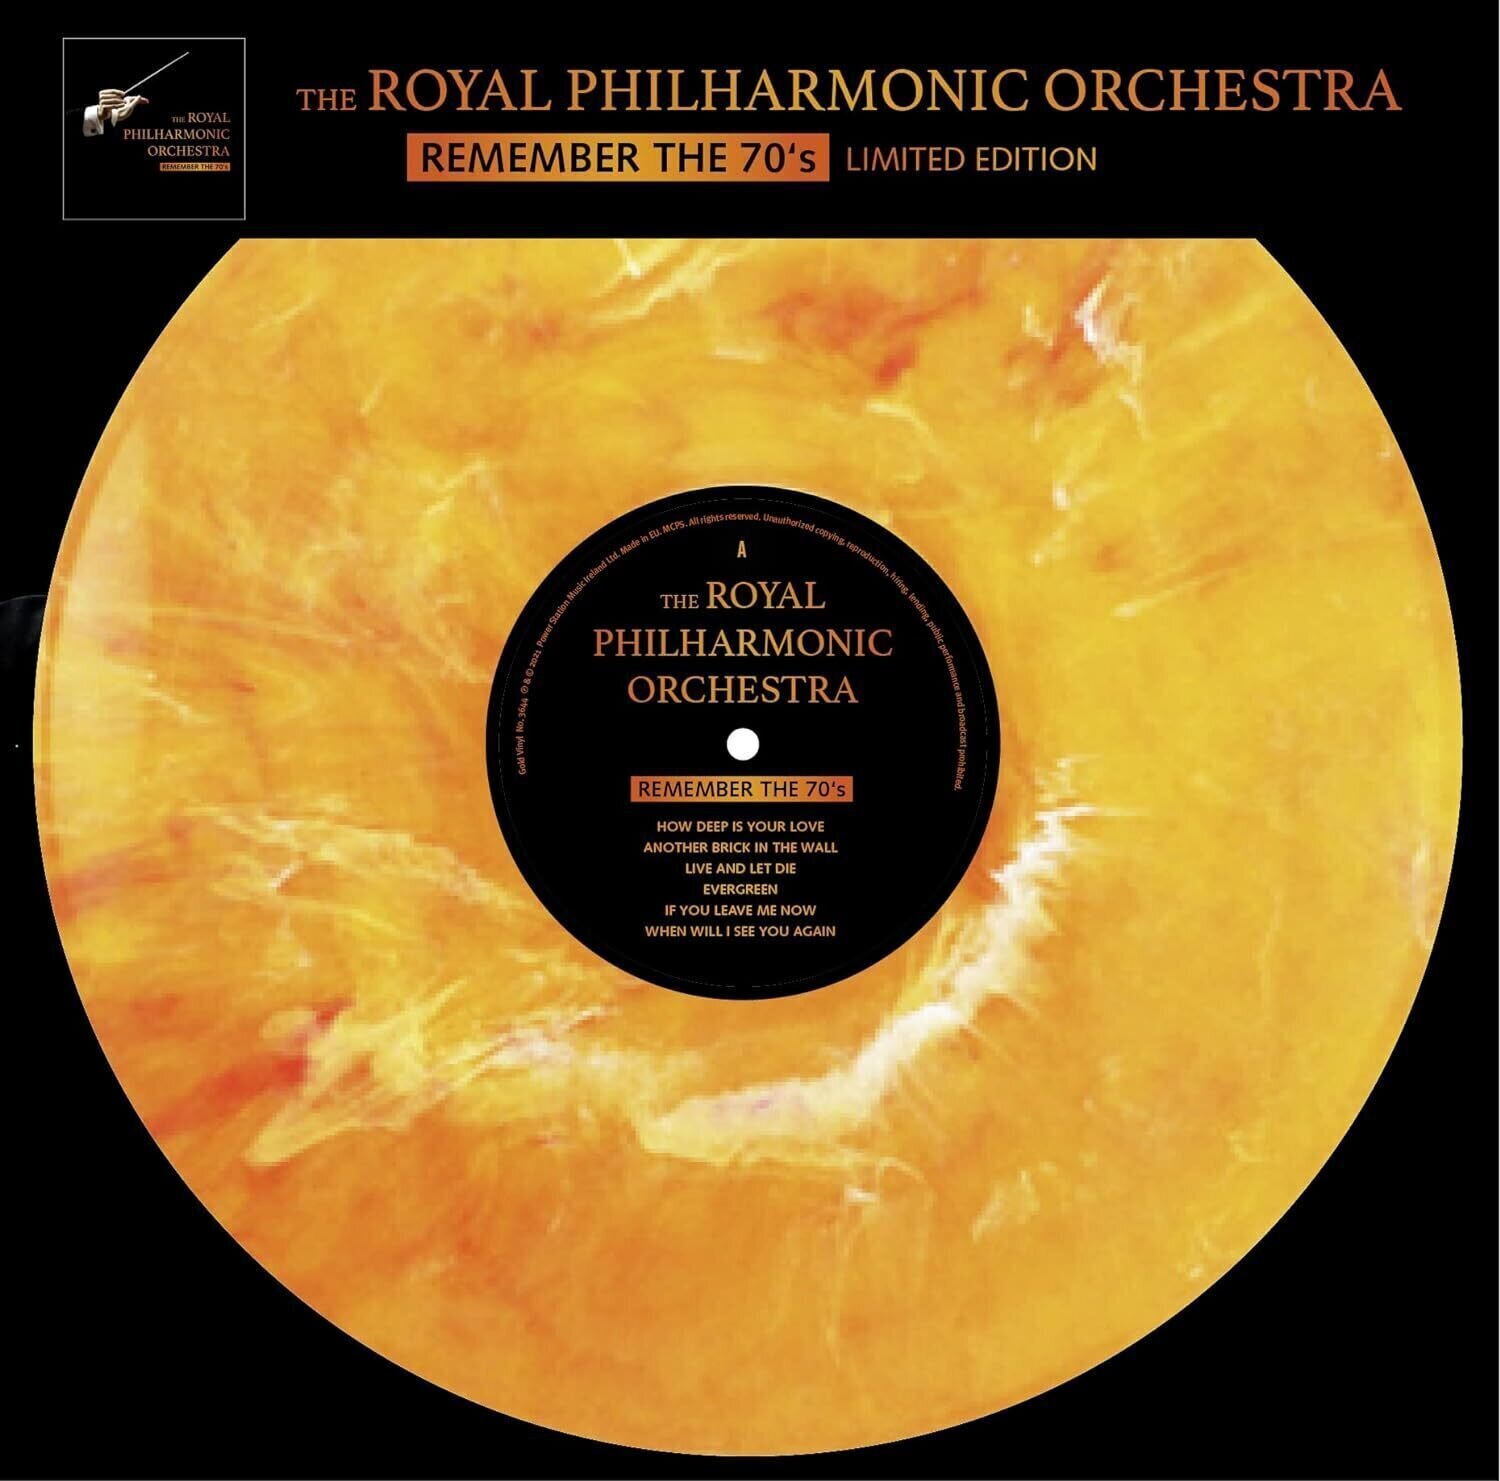 Vinyl Record Royal Philharmonic Orchestra - Remember The 70's (Limited Edition) (Numbered) (Marbled Coloured) (LP)